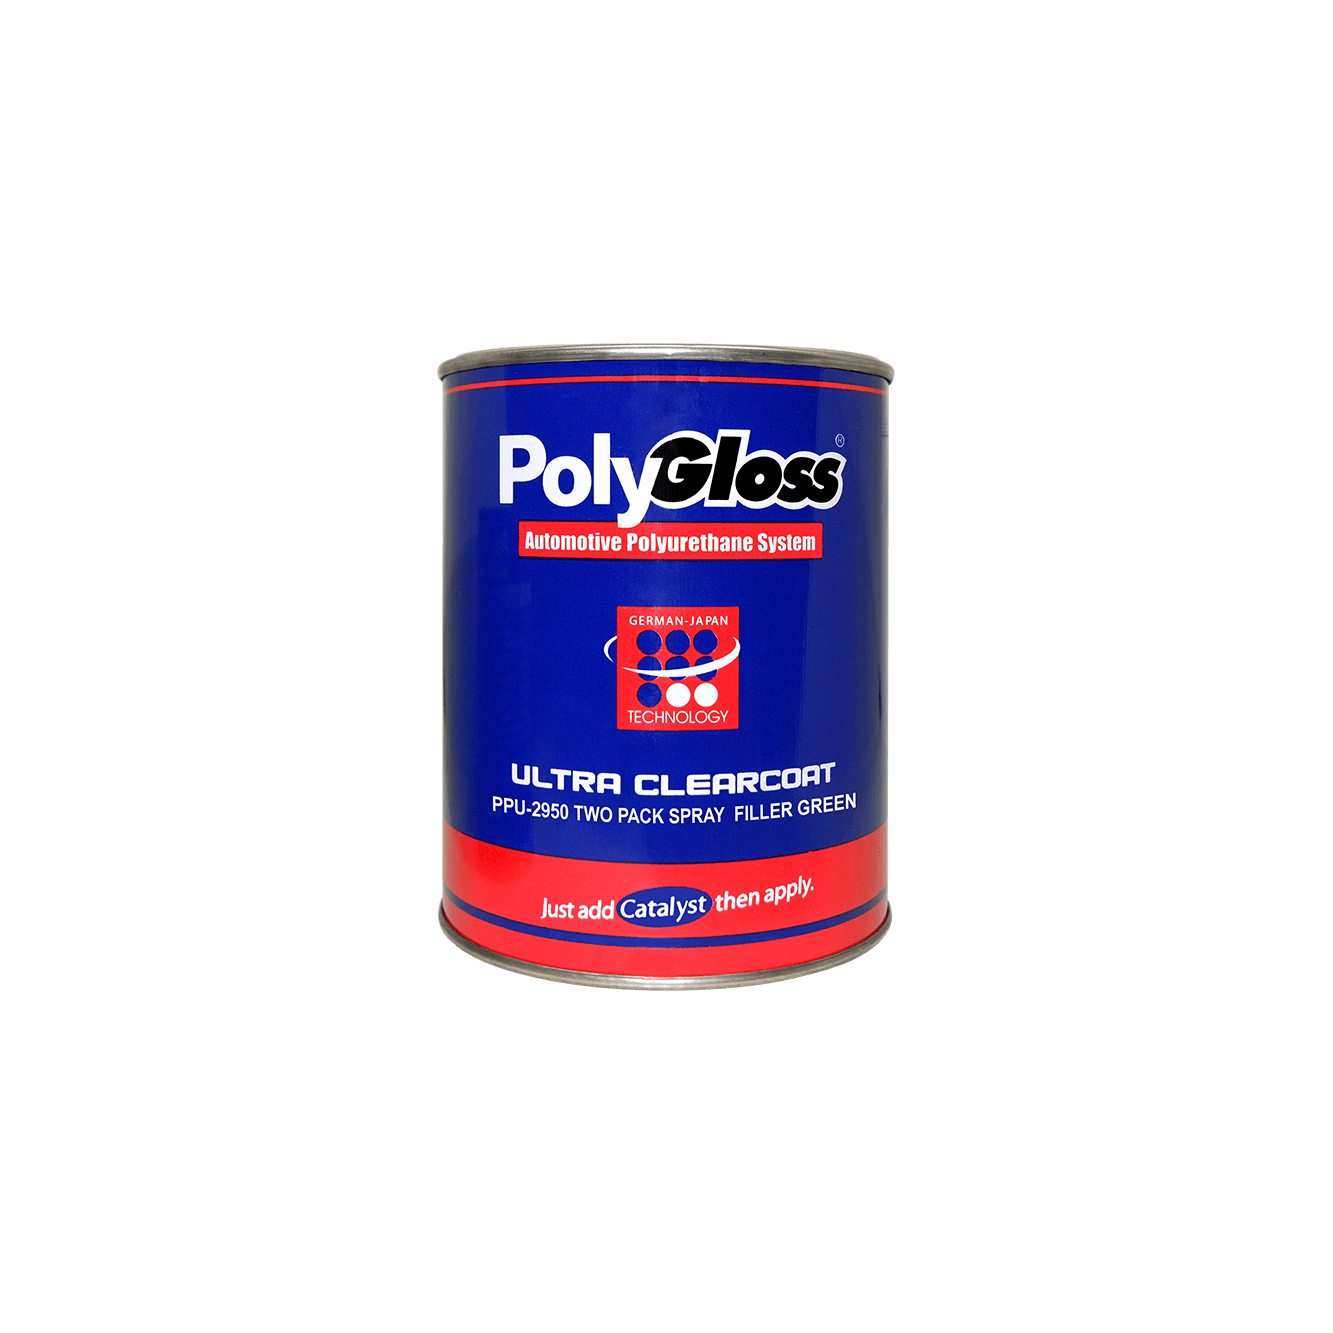 Polygloss Two Pack Spray Filler